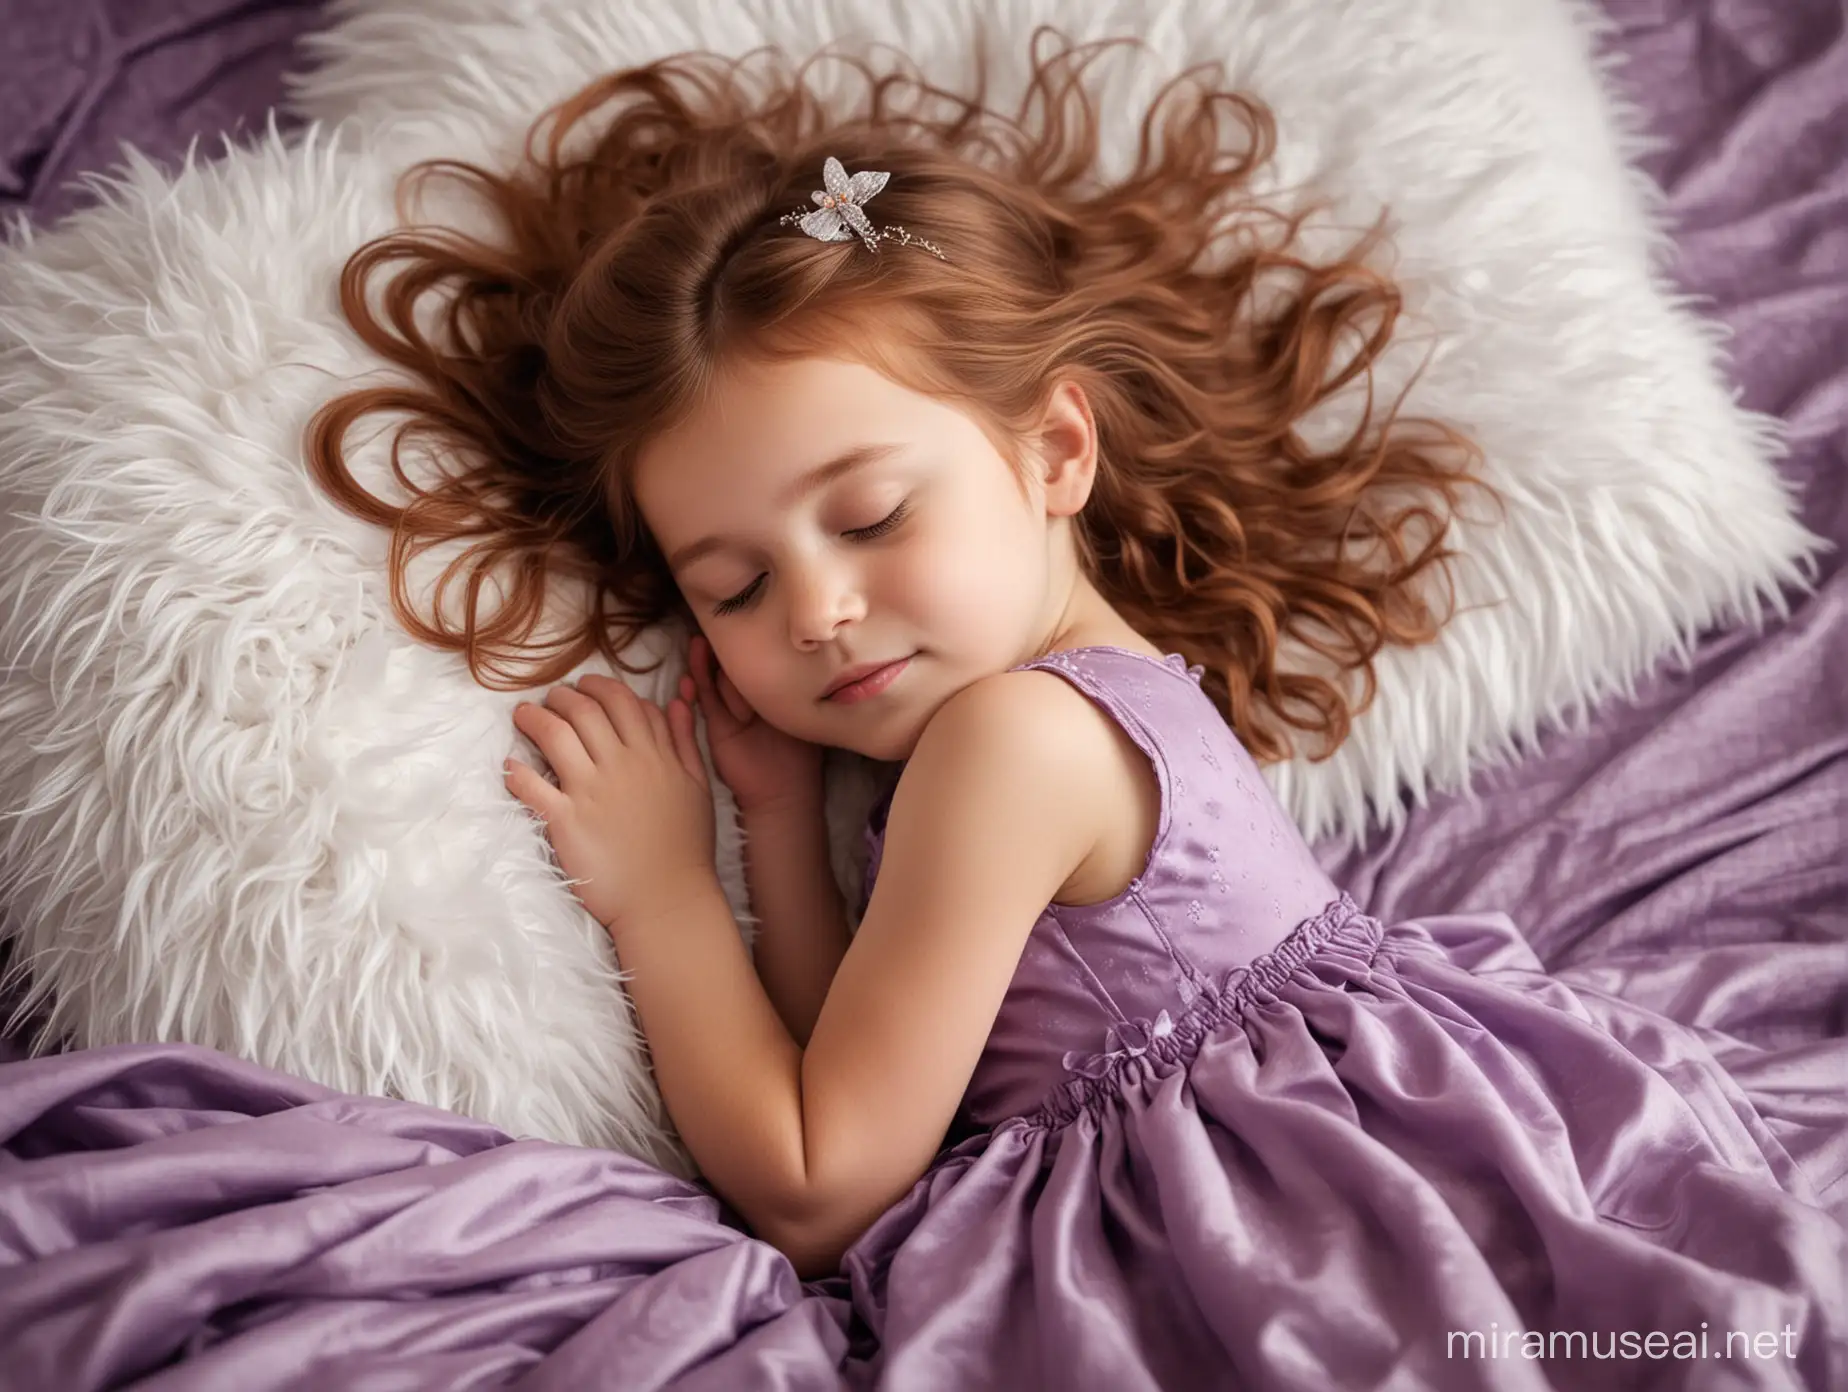 ChestnutHaired Girl in Purple Dress Sleeping with Fairy Companion